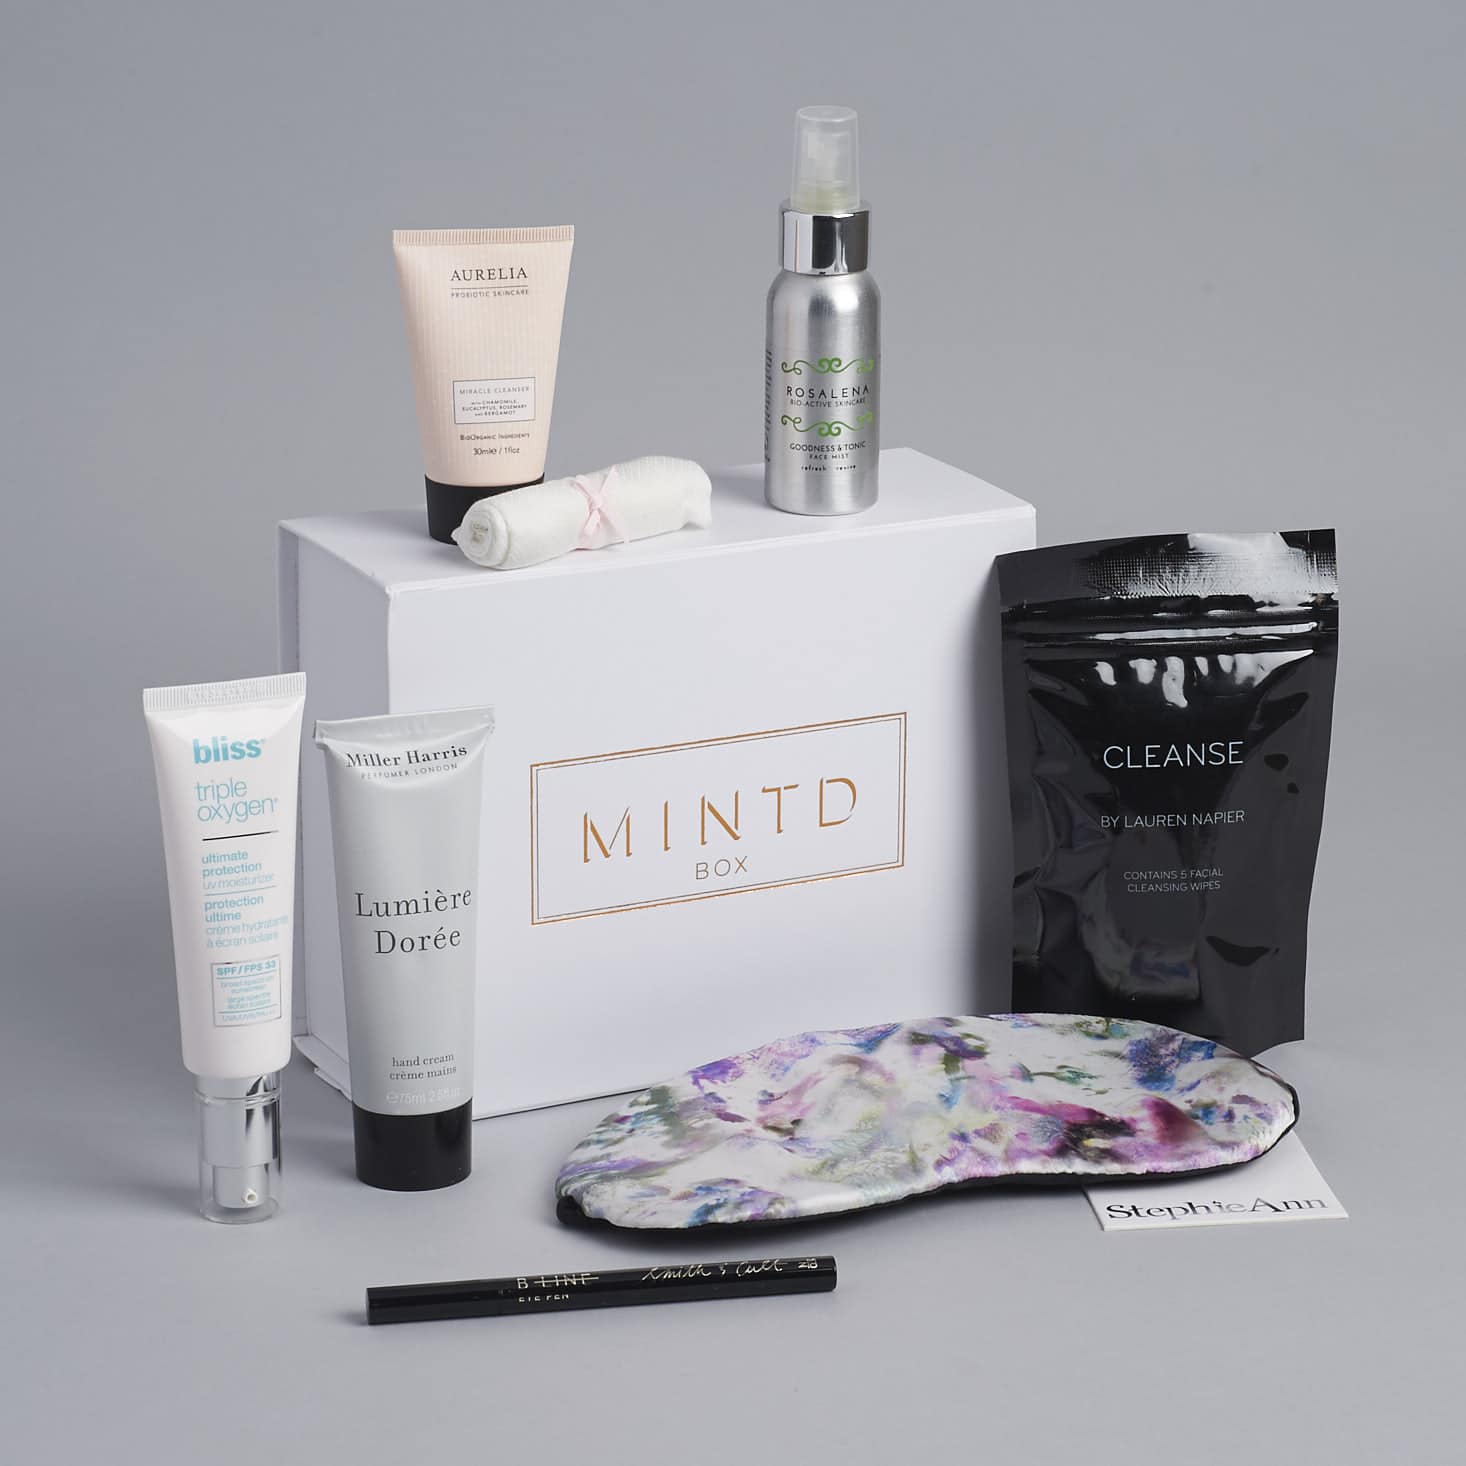 MINTD Box Subscription Review + Coupon Code – June 2017